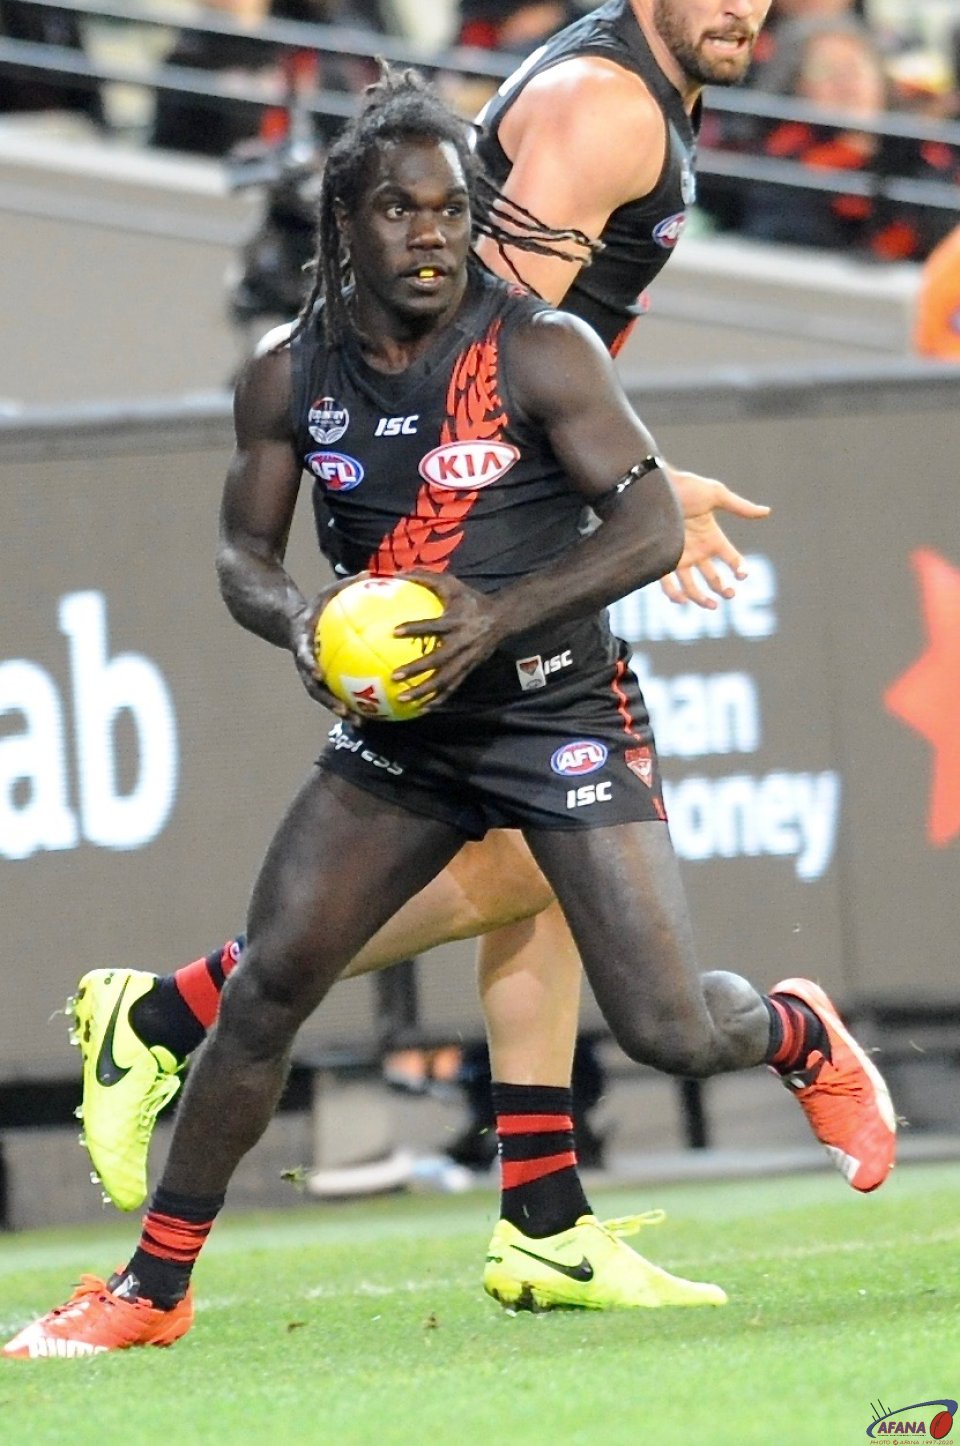 Anthony Macdonald-Tipungwuti in the forward pocket